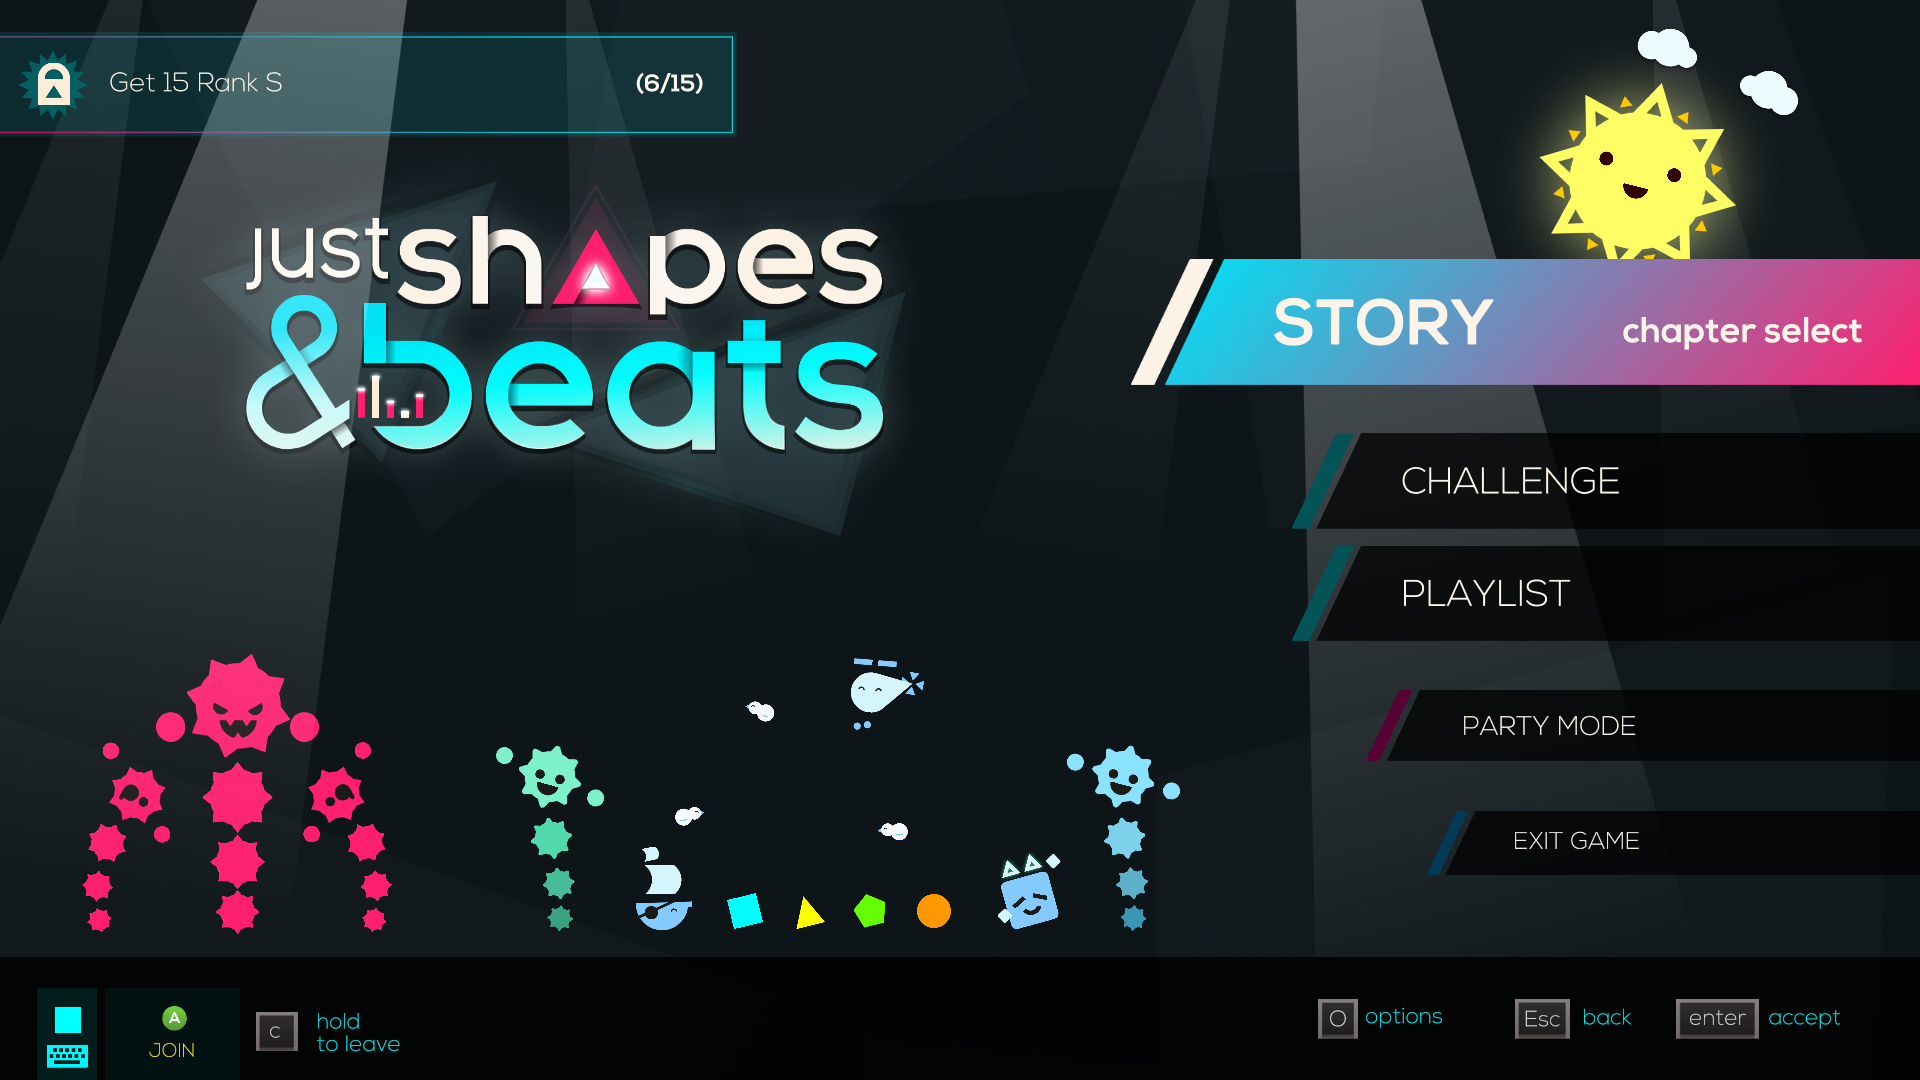 Just shapes and beats Fan-Games by Apple_Studio's